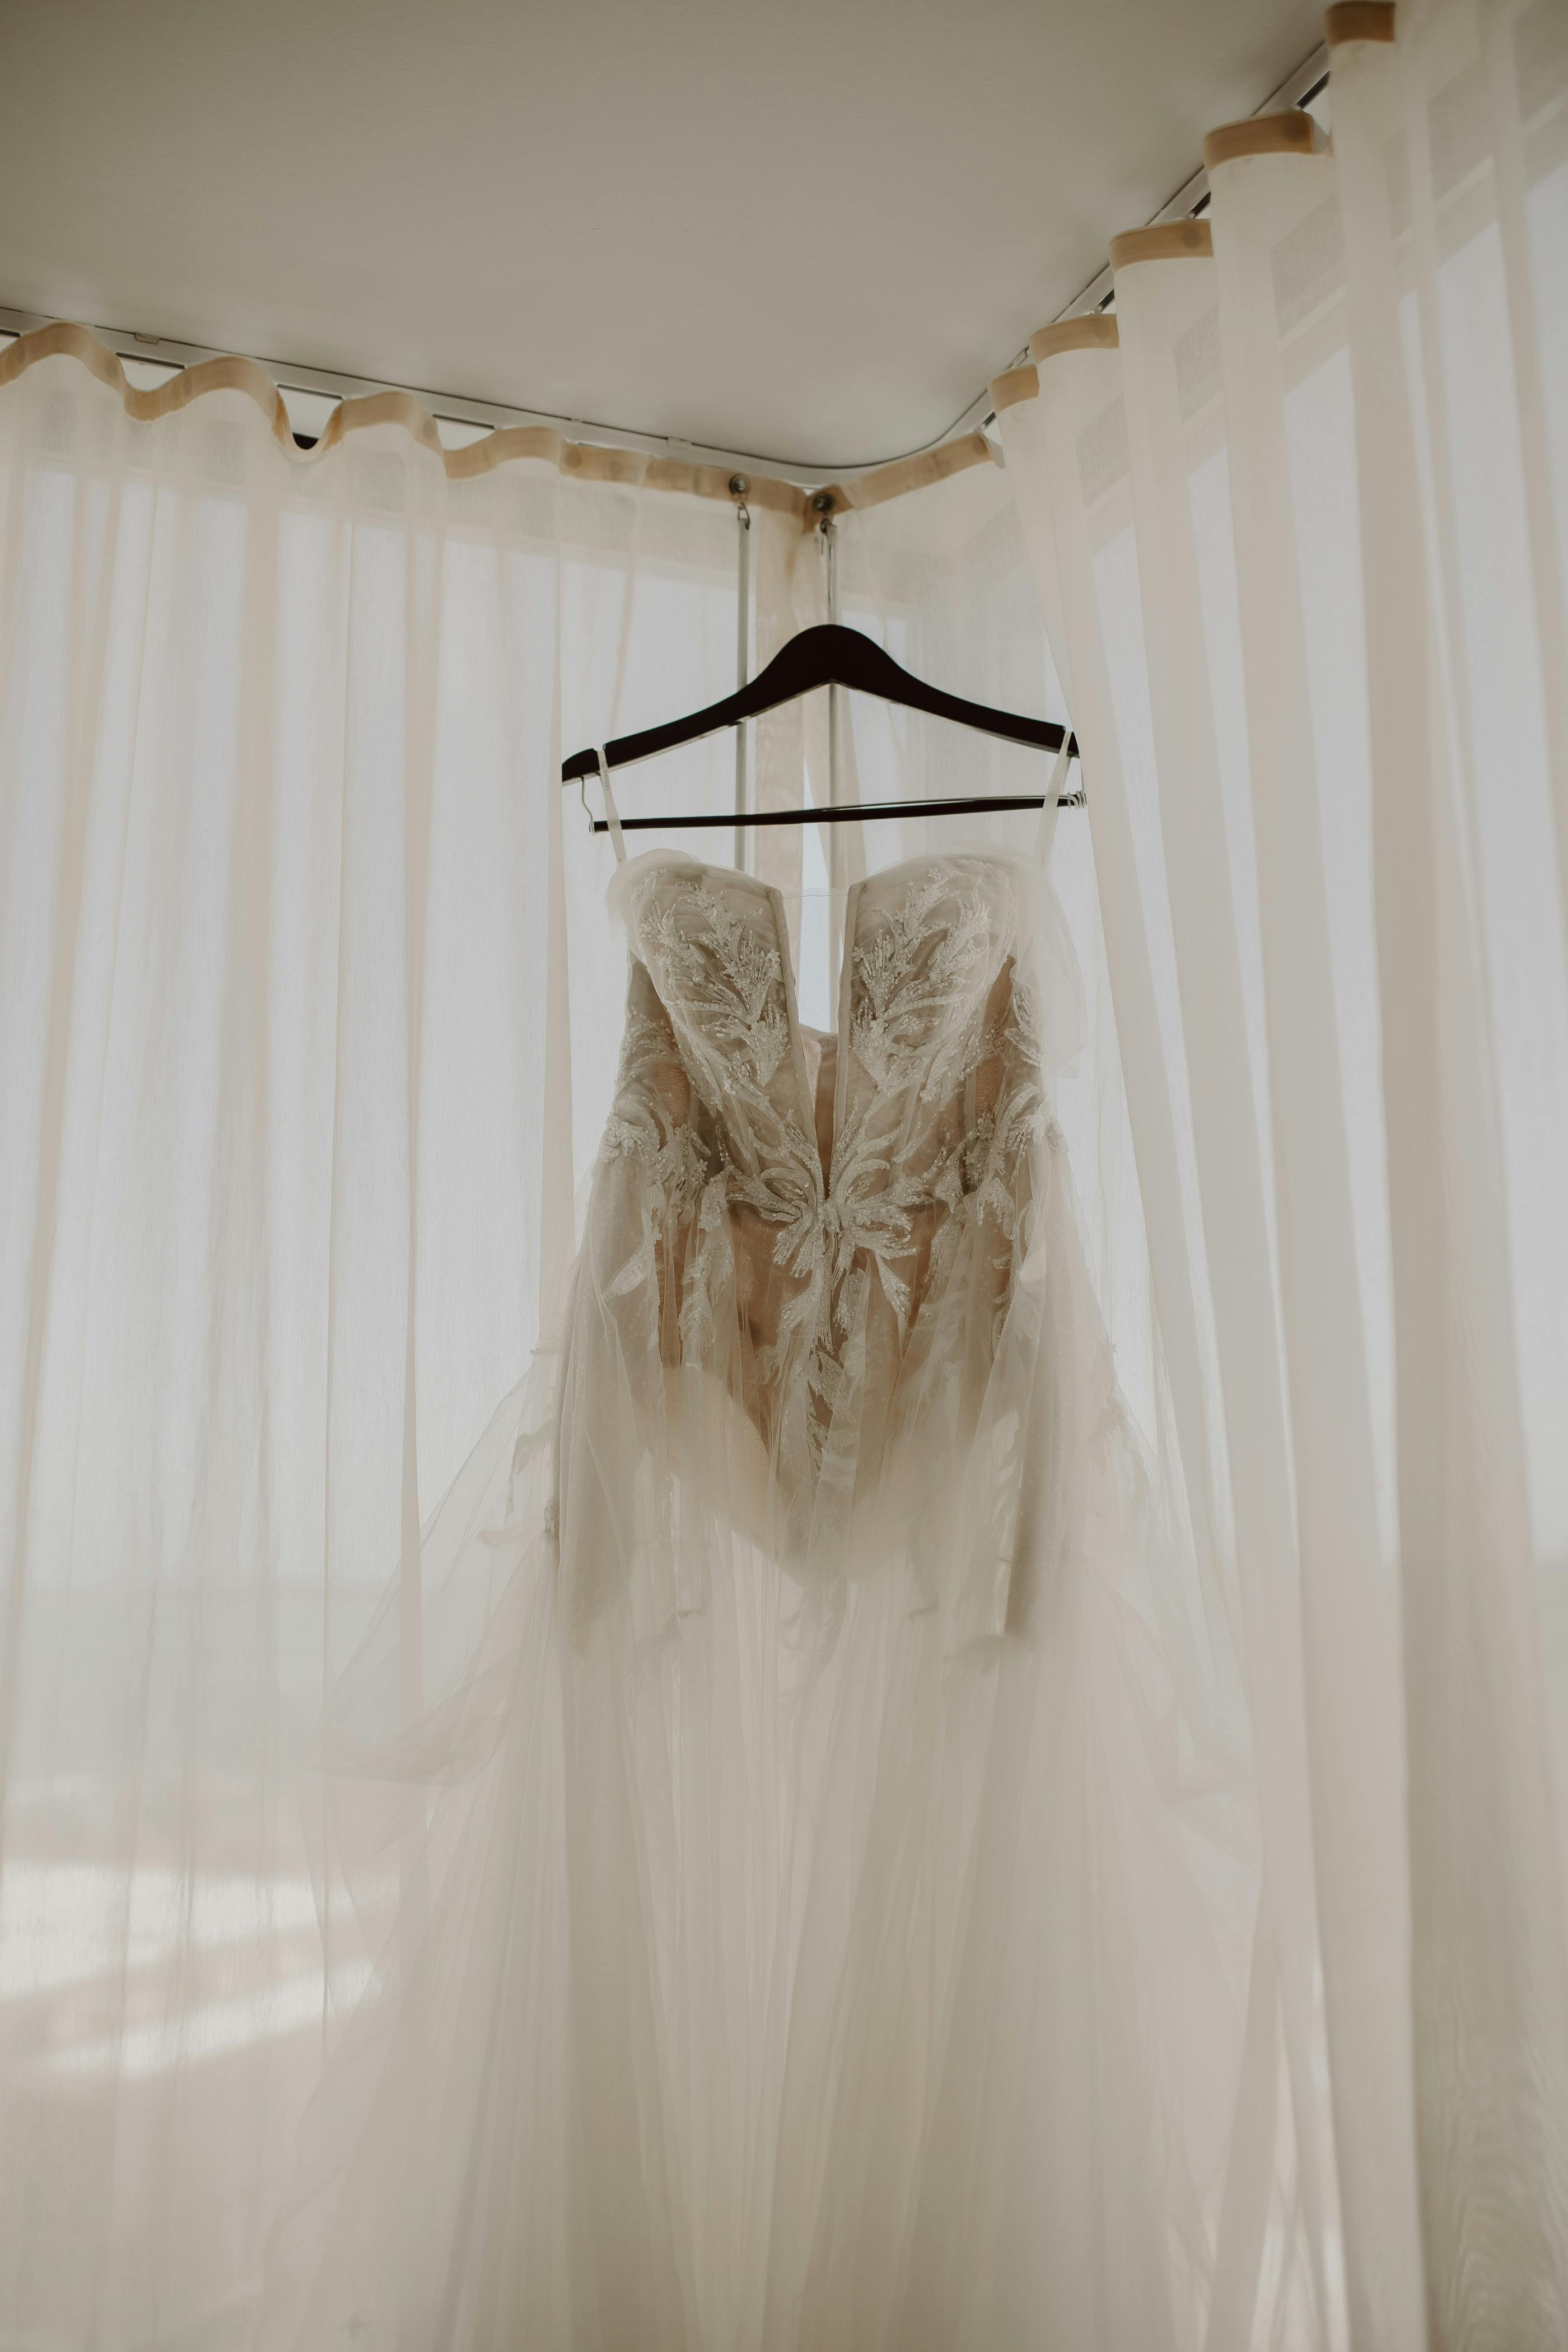 For illustration purposes only. Wedding gown on a hanger | Source: Pexels